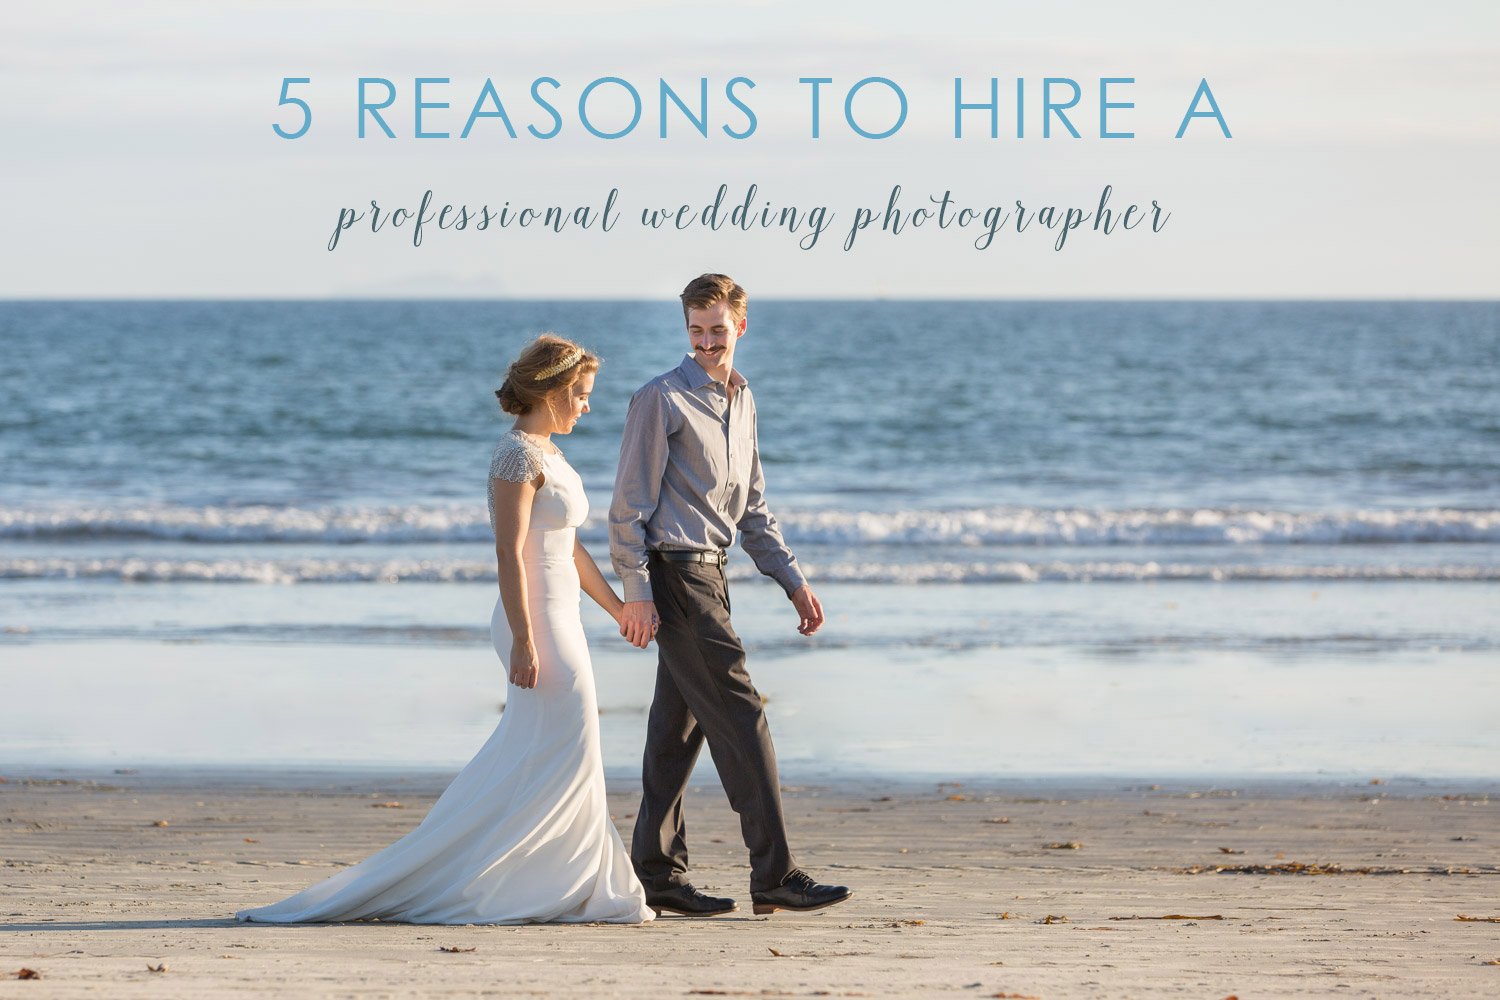 5 Reasons to Hire a Professional Wedding Photographer